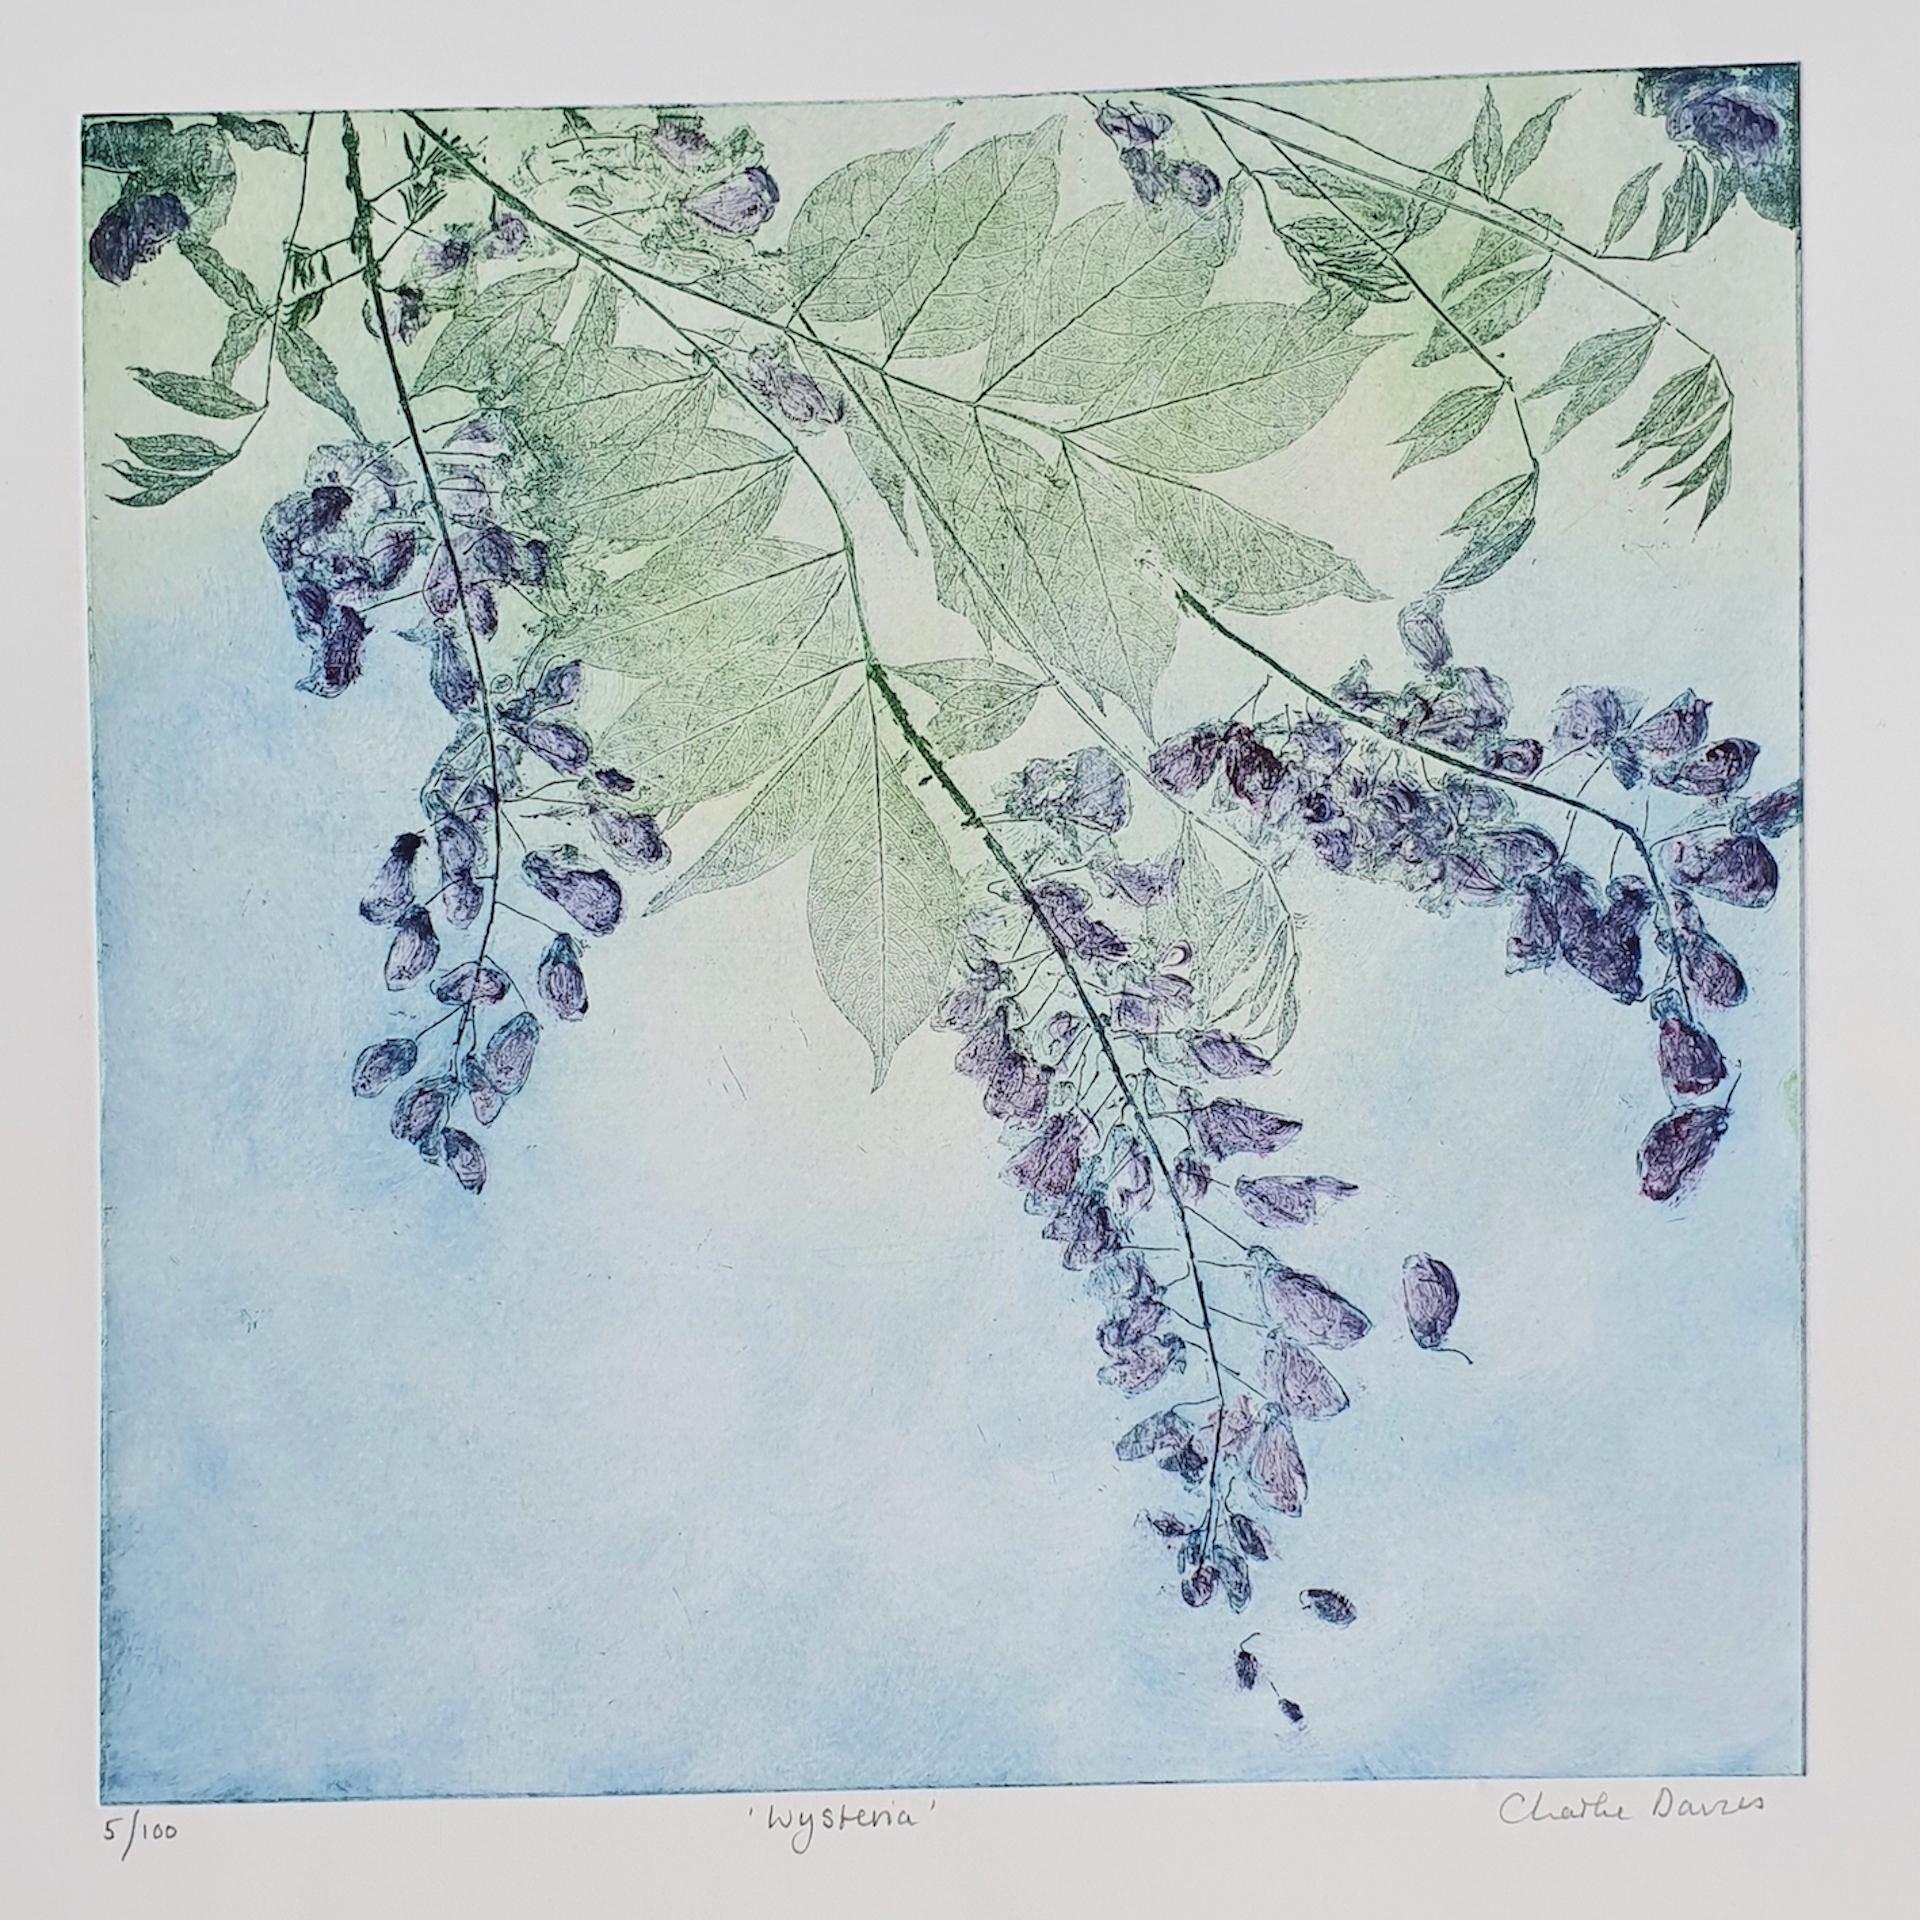 Wysteria, Charlie Davies, Limited Edition Etching, Contemporary Still Life Art